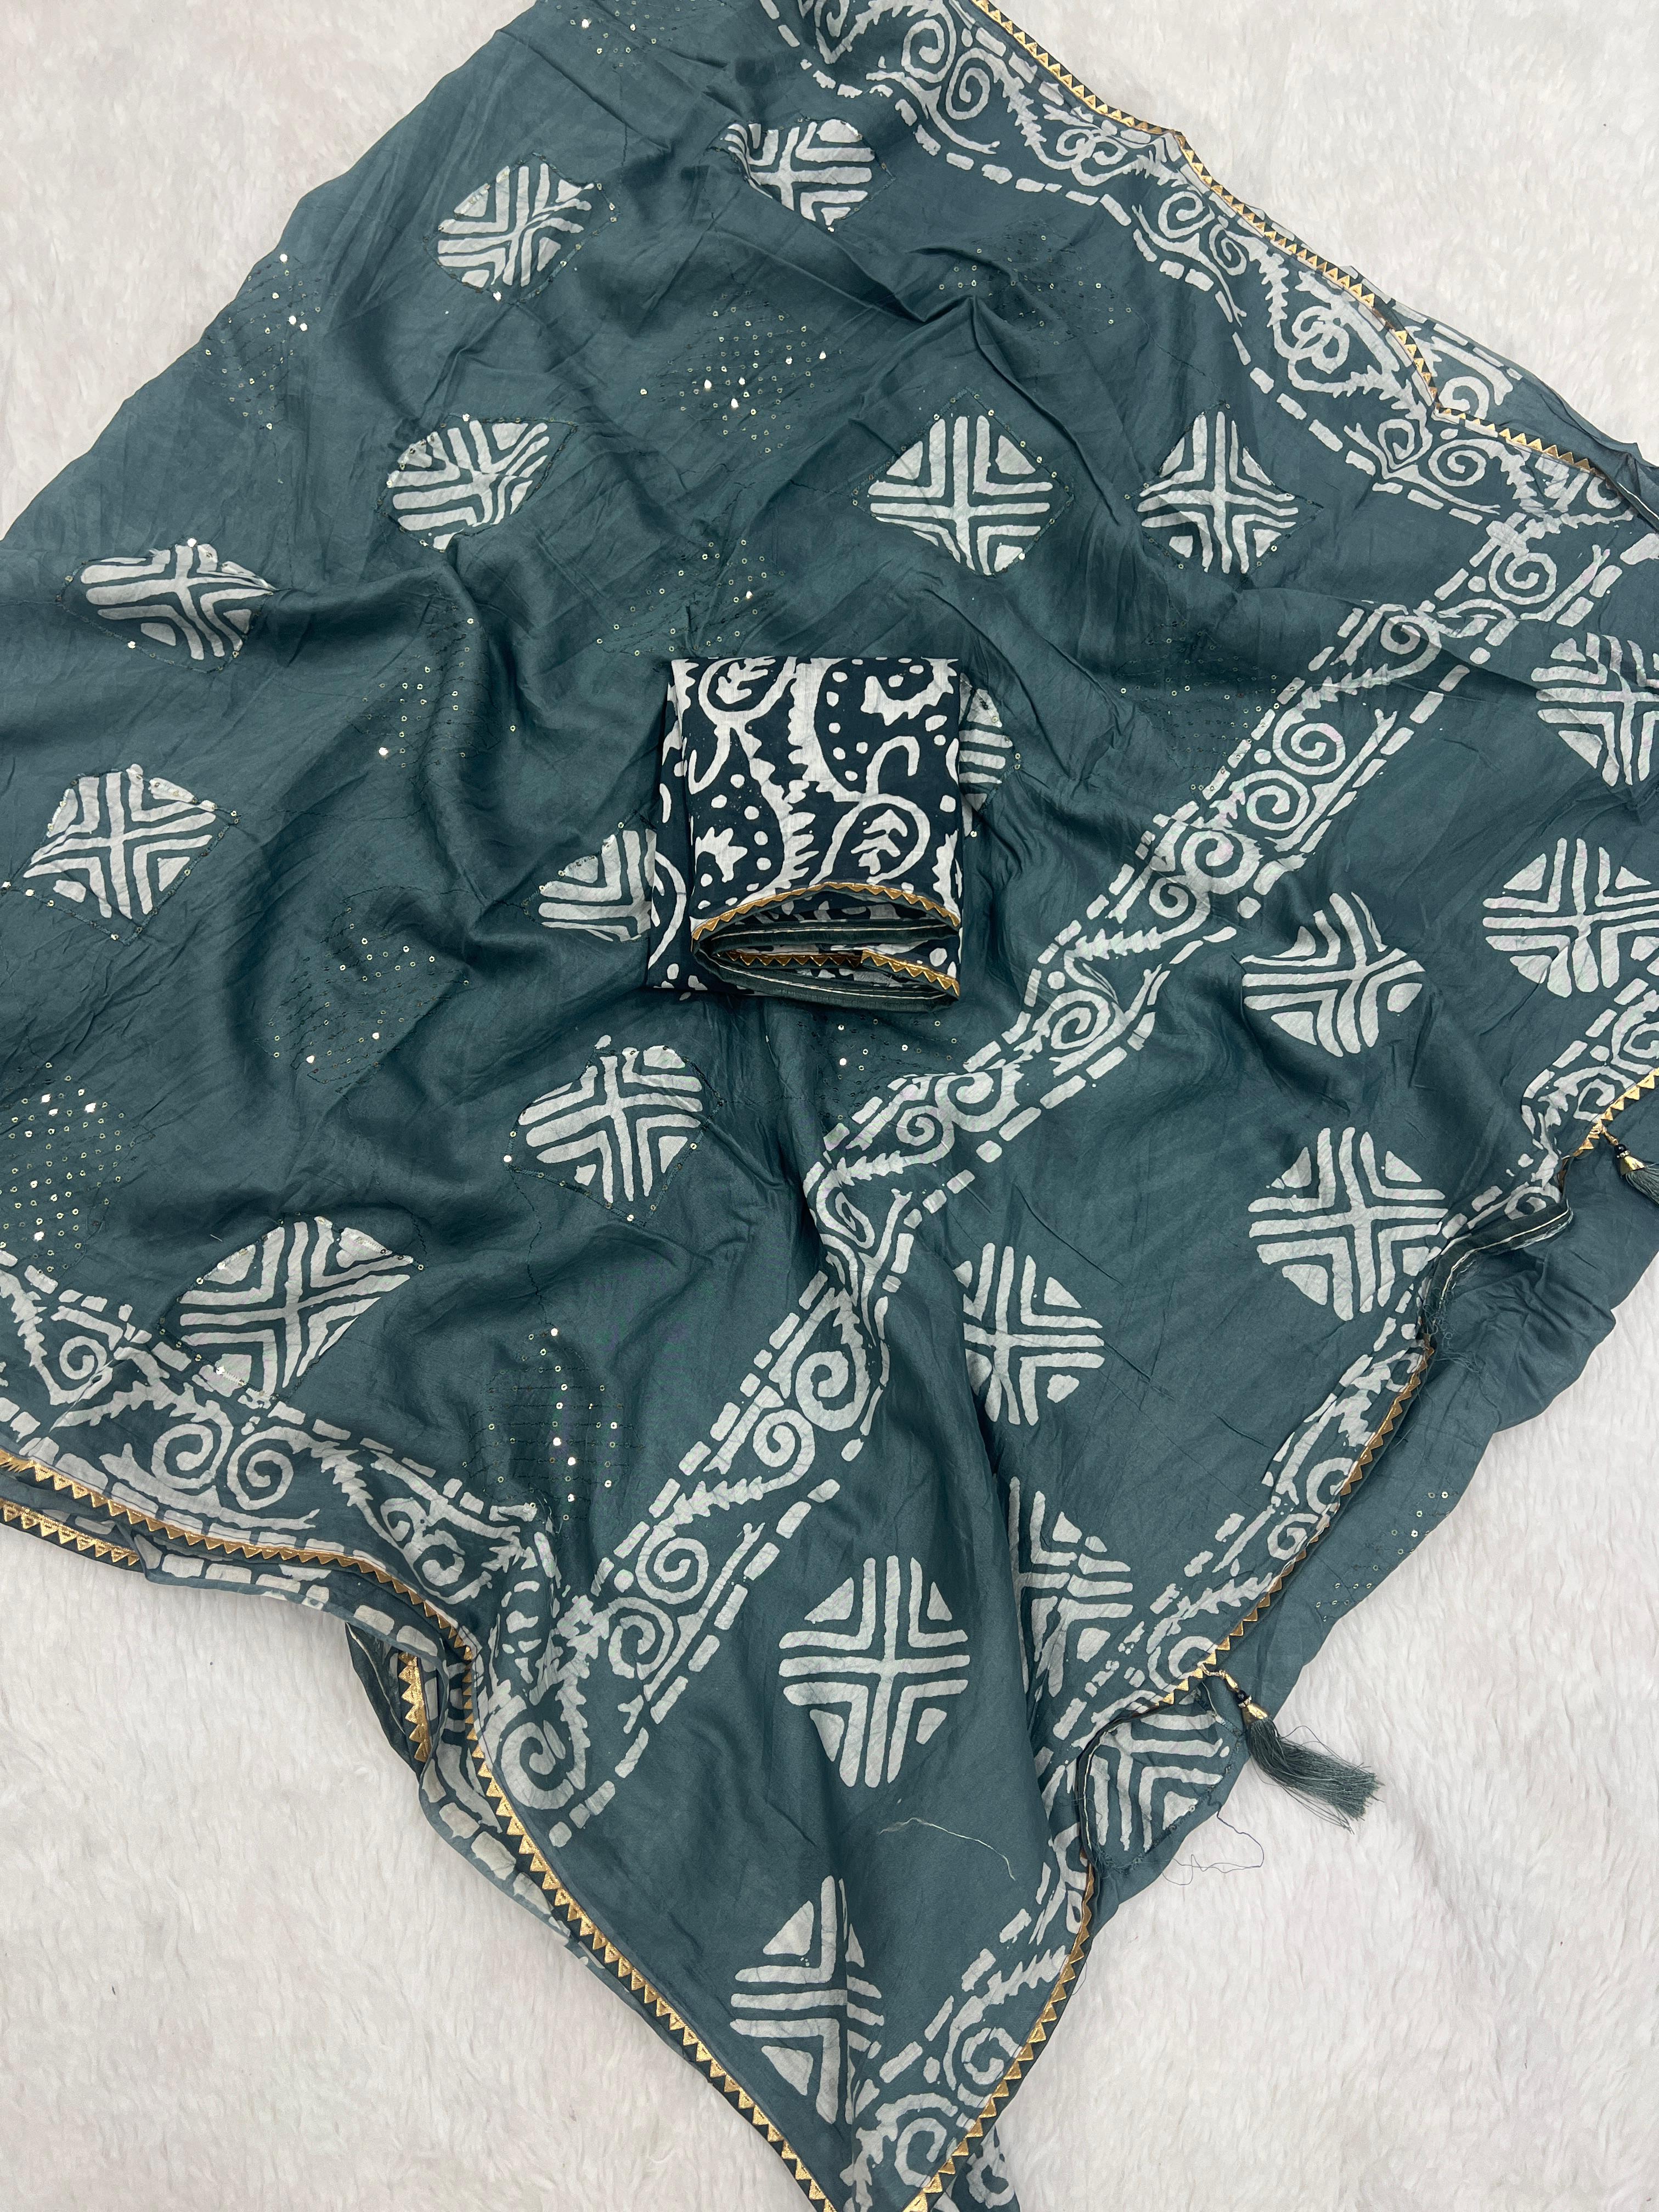 Chaderi mono-cotton with batik print with all over sequence work Saree 21200N